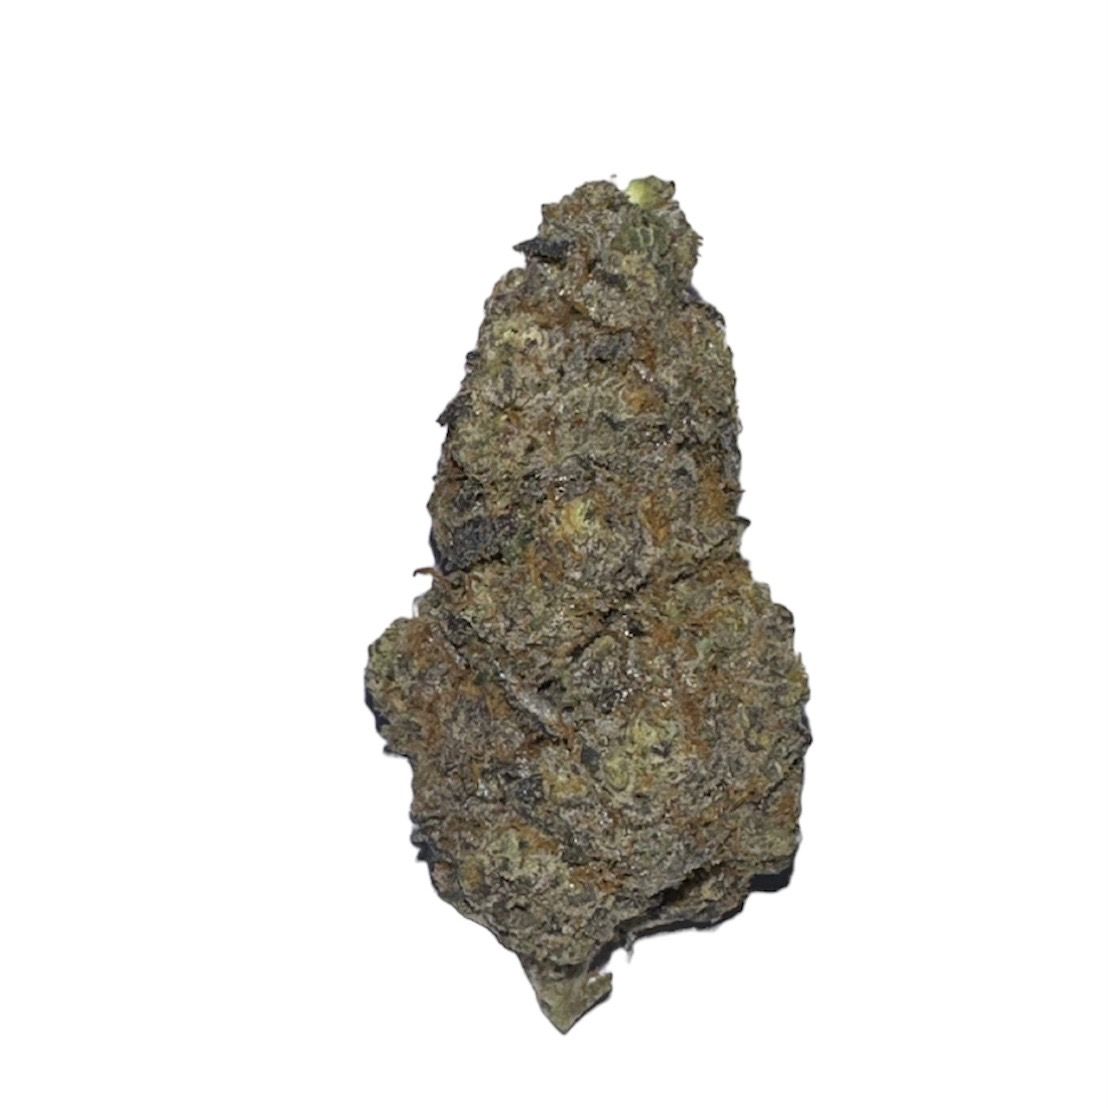 NEW NEW! LIL Cookies and Cream Flower Indica